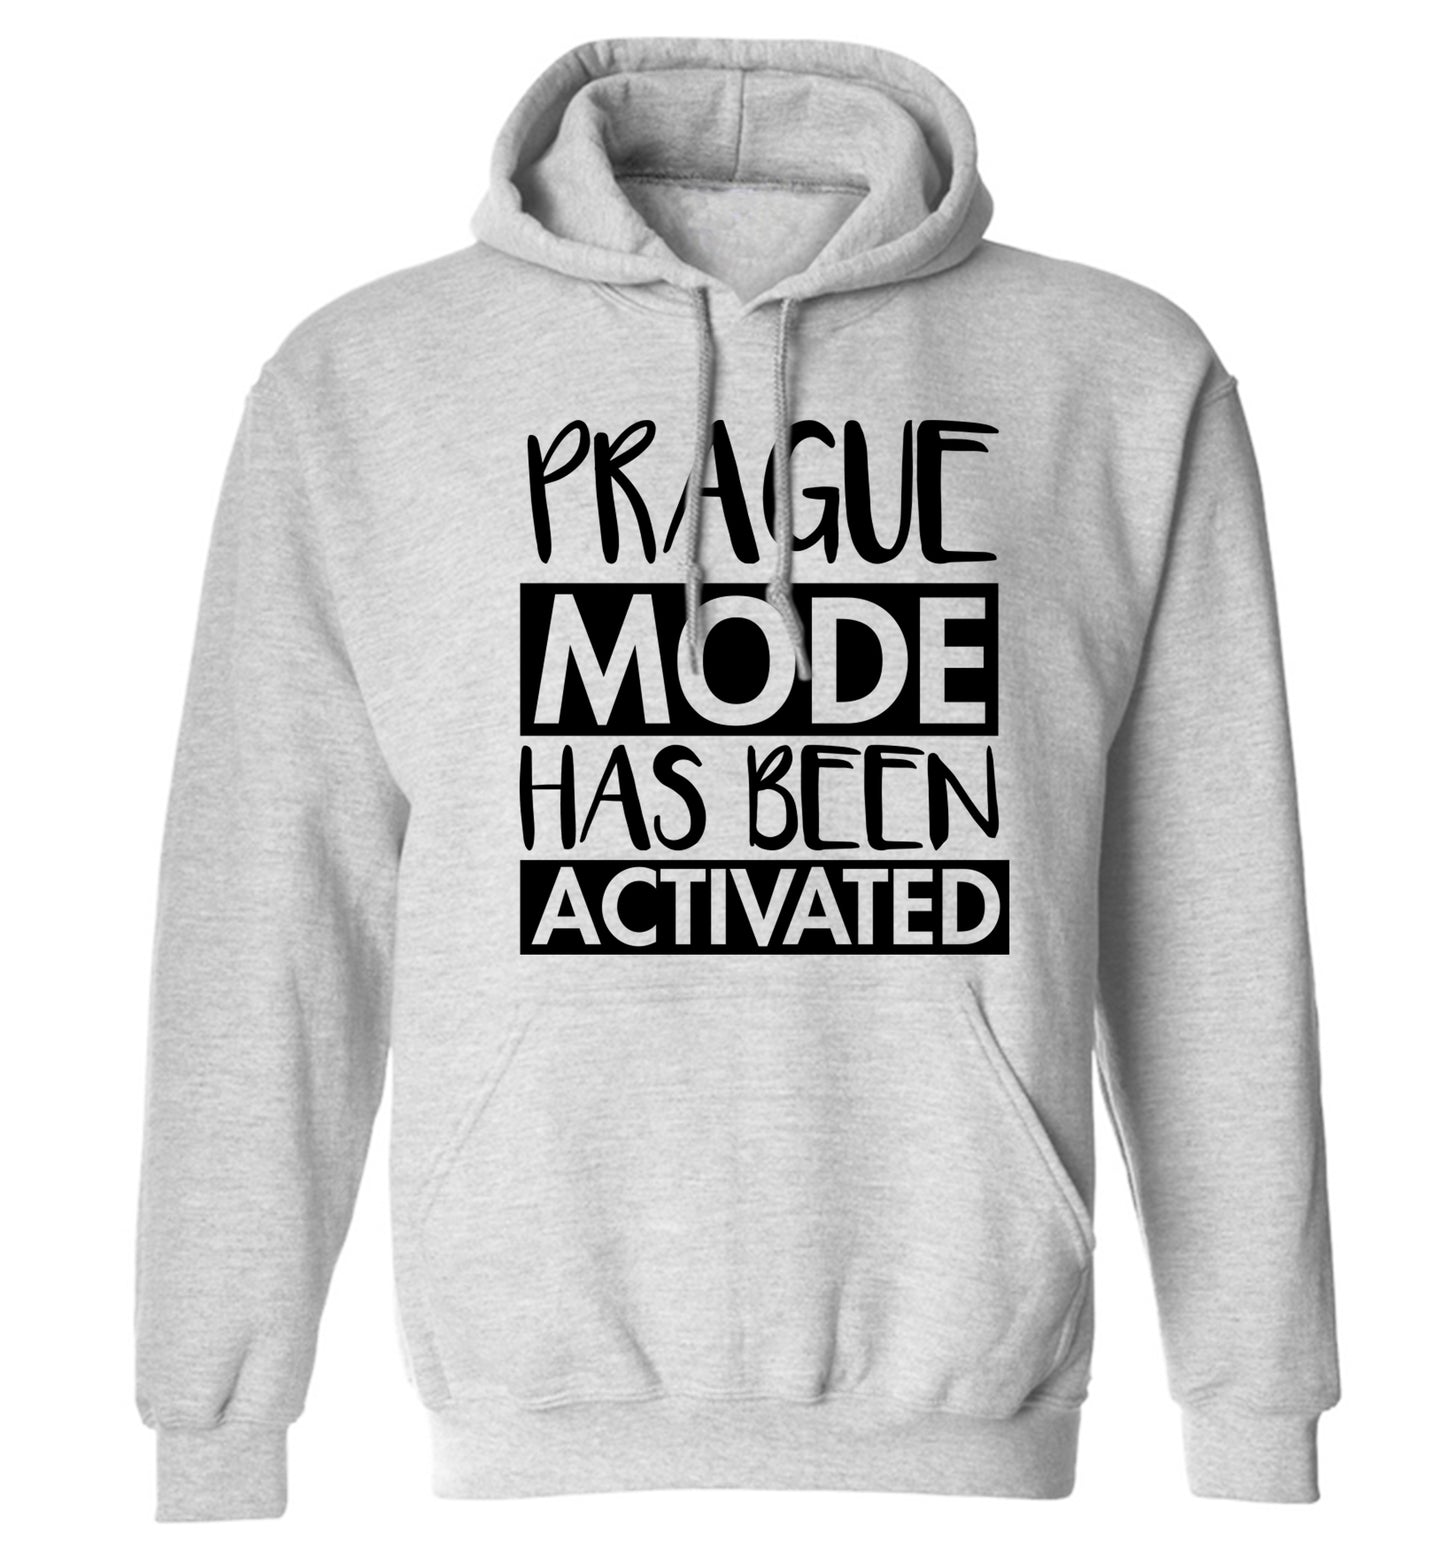 Prague mode has been activated adults unisex grey hoodie 2XL